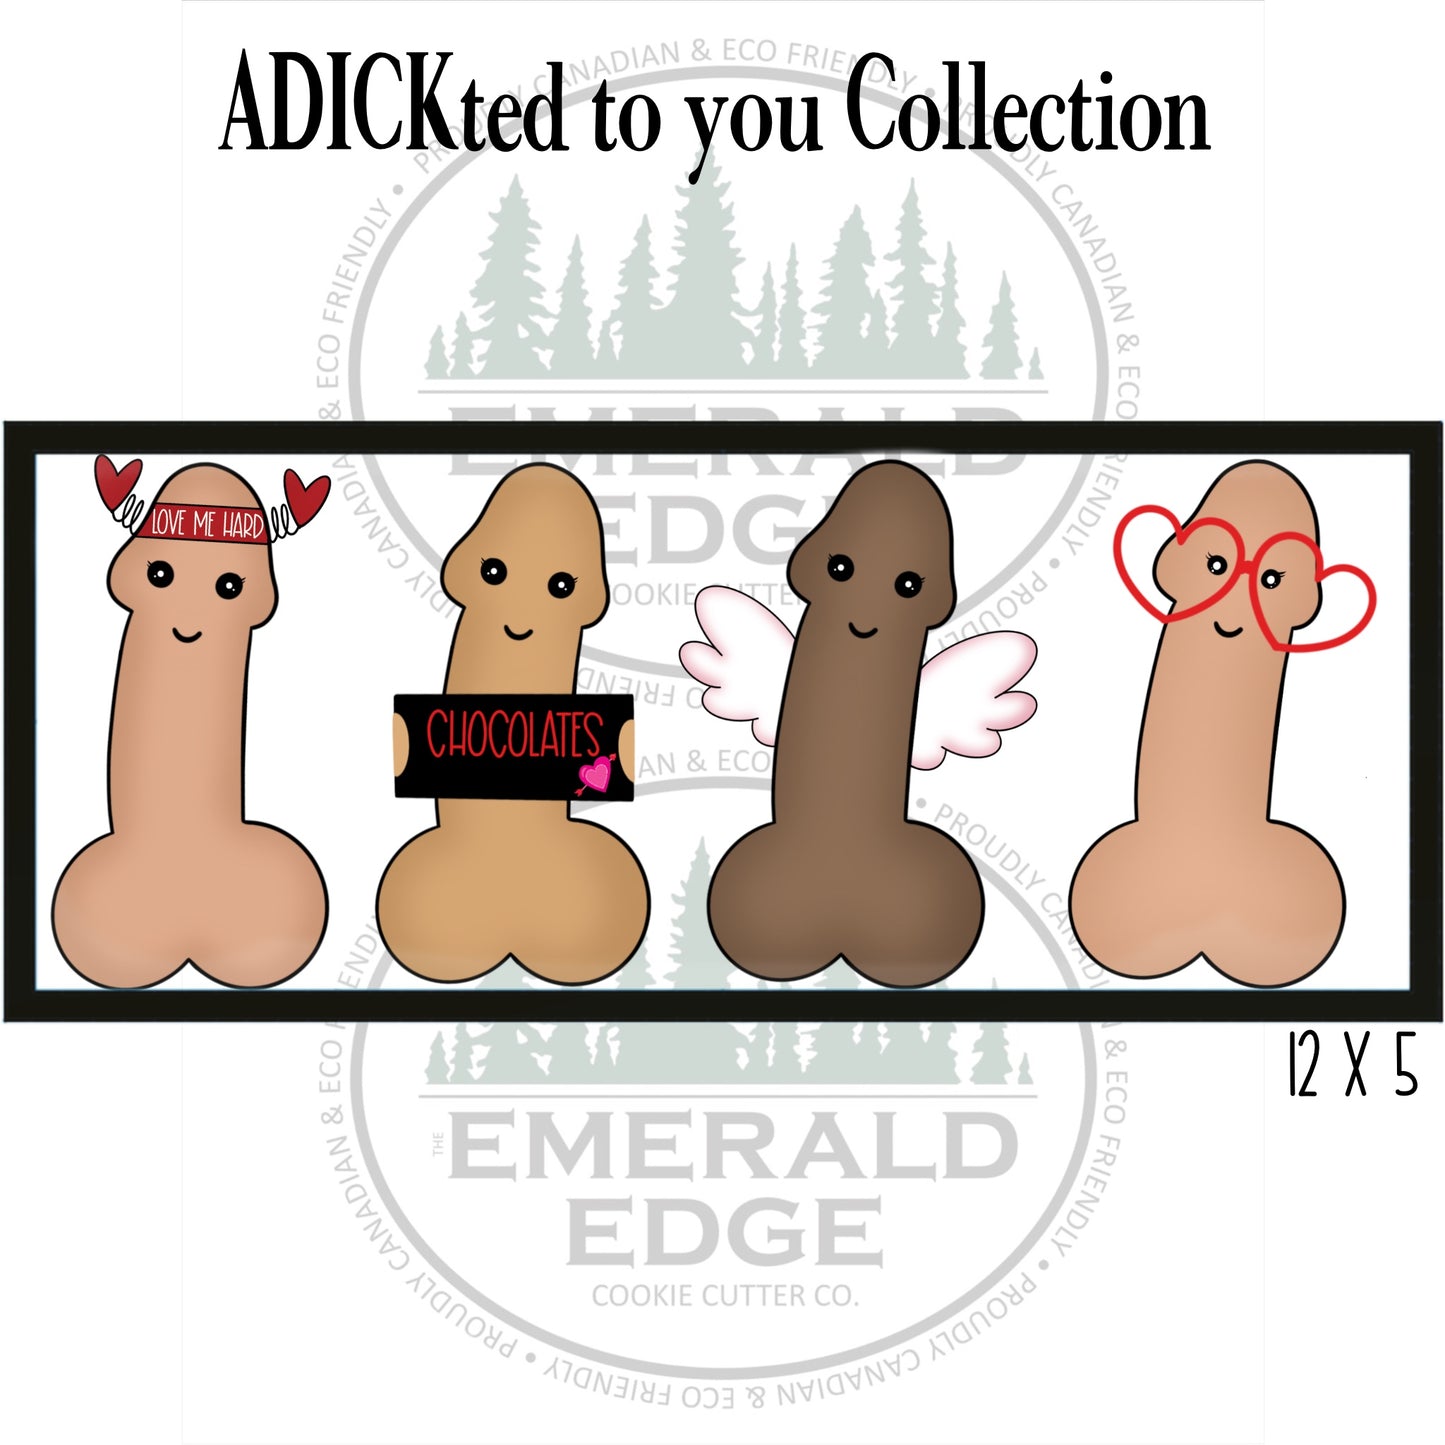 ADICKted to you Collection